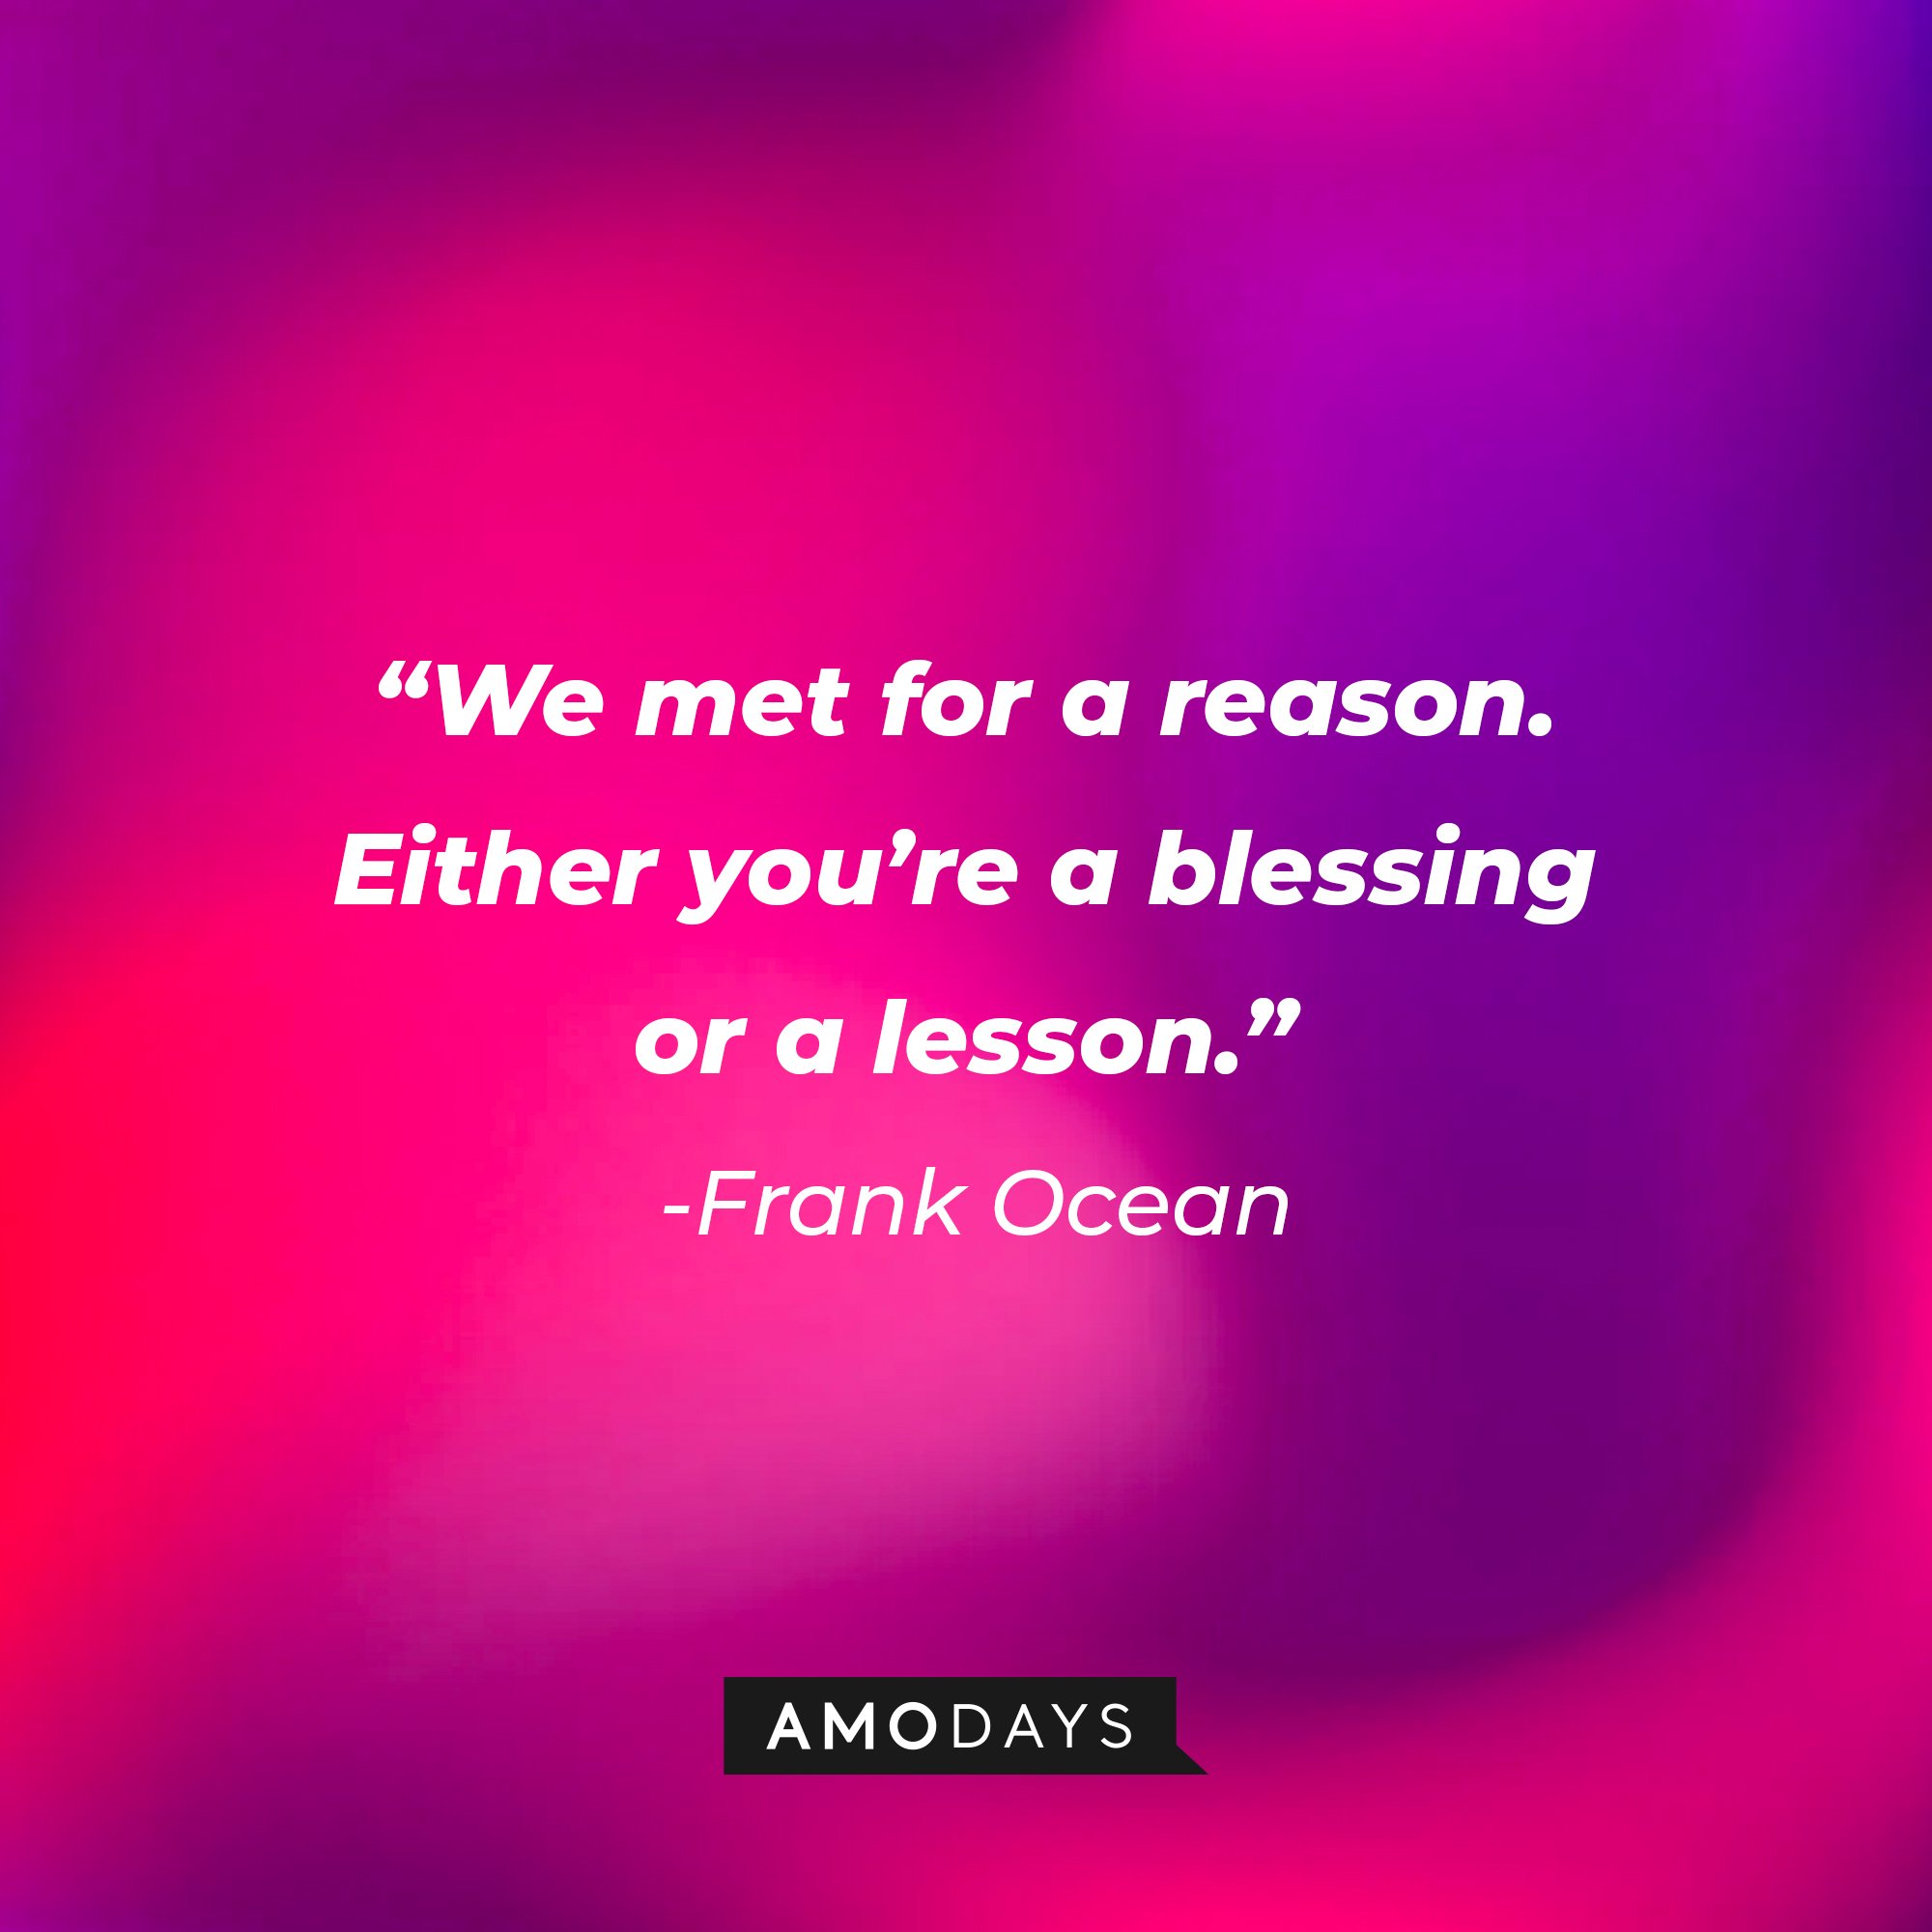   Frank Ocean’s quote: "We met for a reason. Either you’re a blessing or a lesson.” | Image: AmoDays